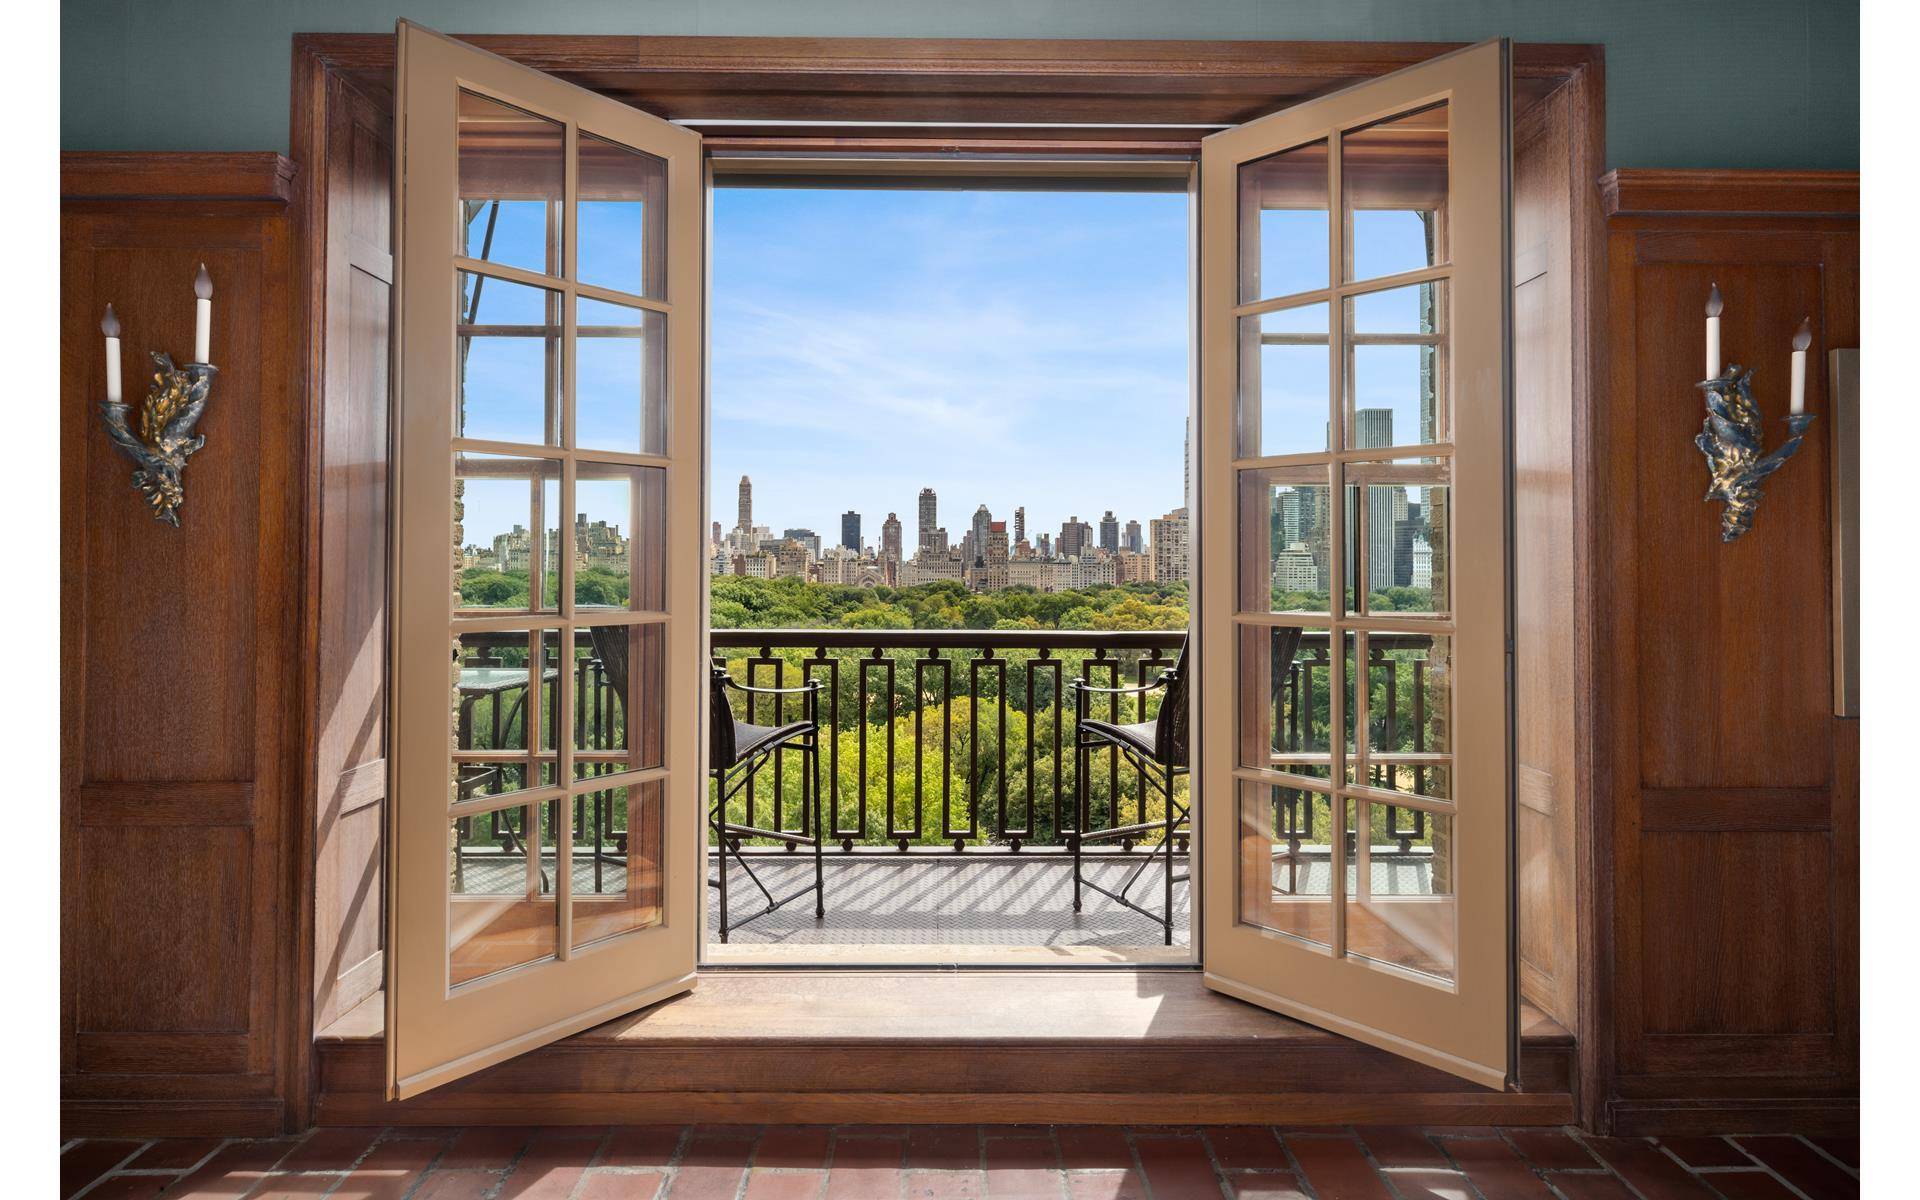 A truly one of a kind offering on Central Park WestPerched high above Central Park West on 64th Street, Residence 11AGEDF is one of the finest pre war homes on ...